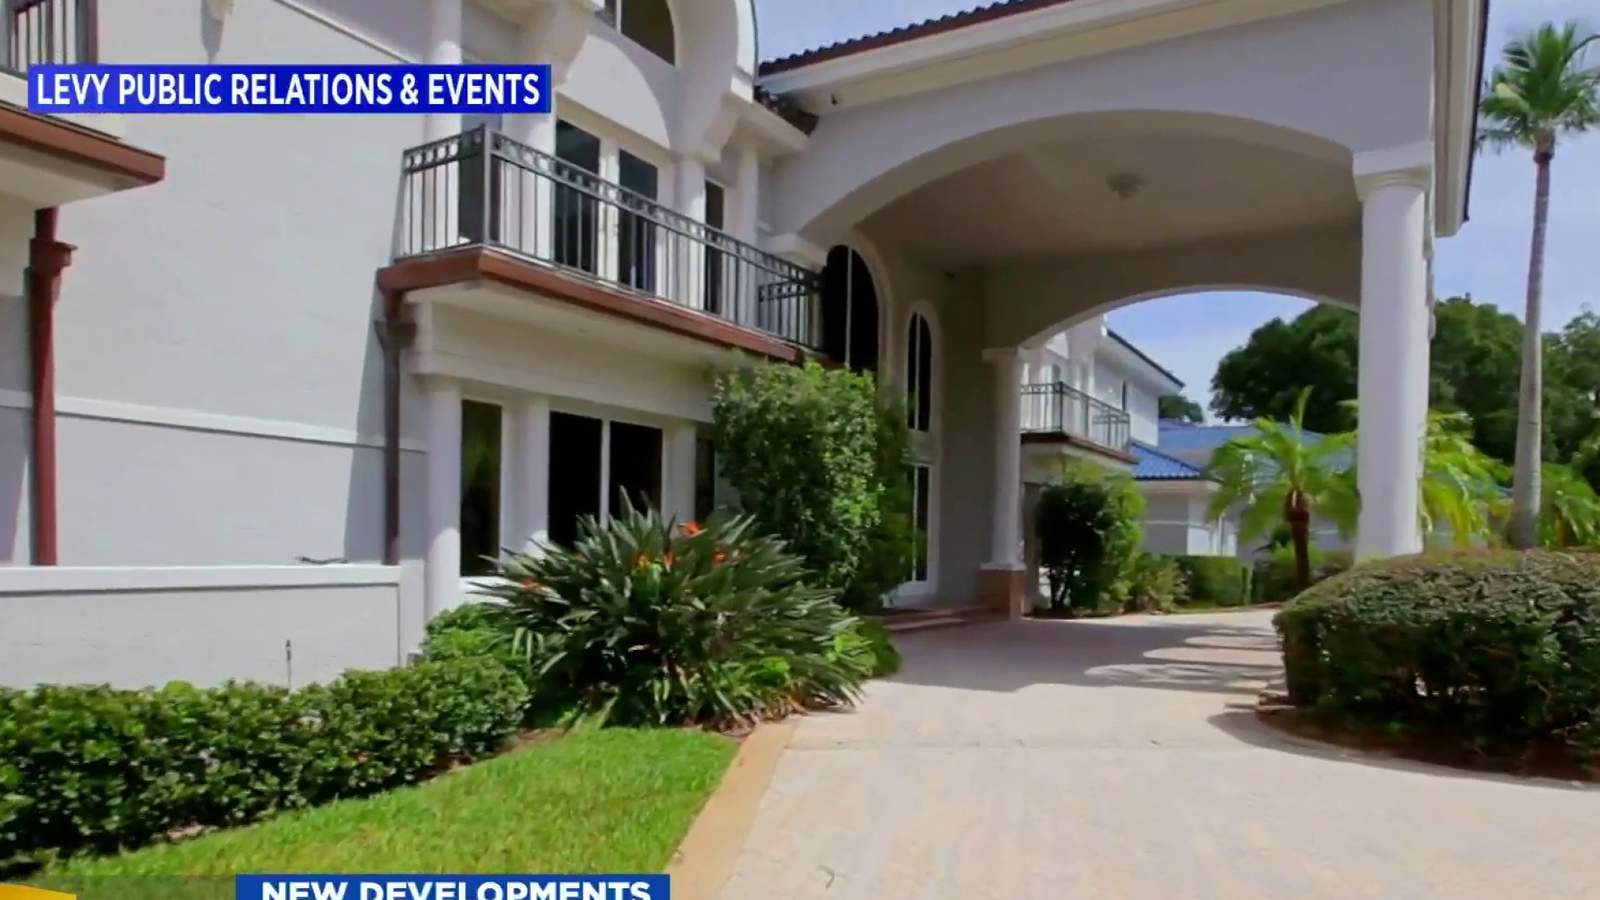 Shaq’s Isleworth mansion discounted by $3 million. Here’s how much it’s going to cost you